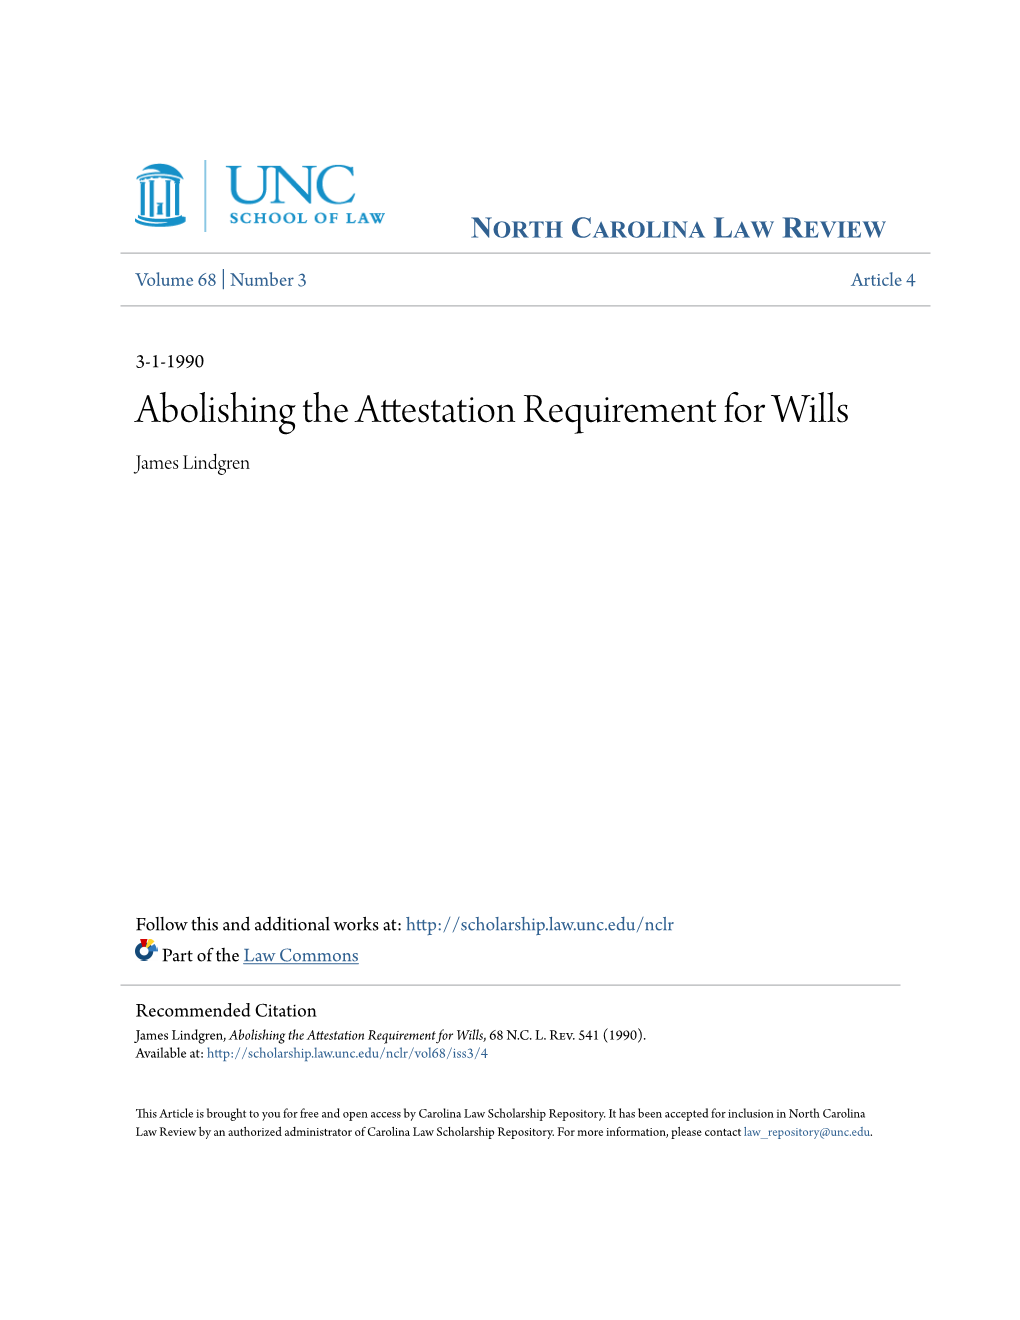 Abolishing the Attestation Requirement for Wills James Lindgren